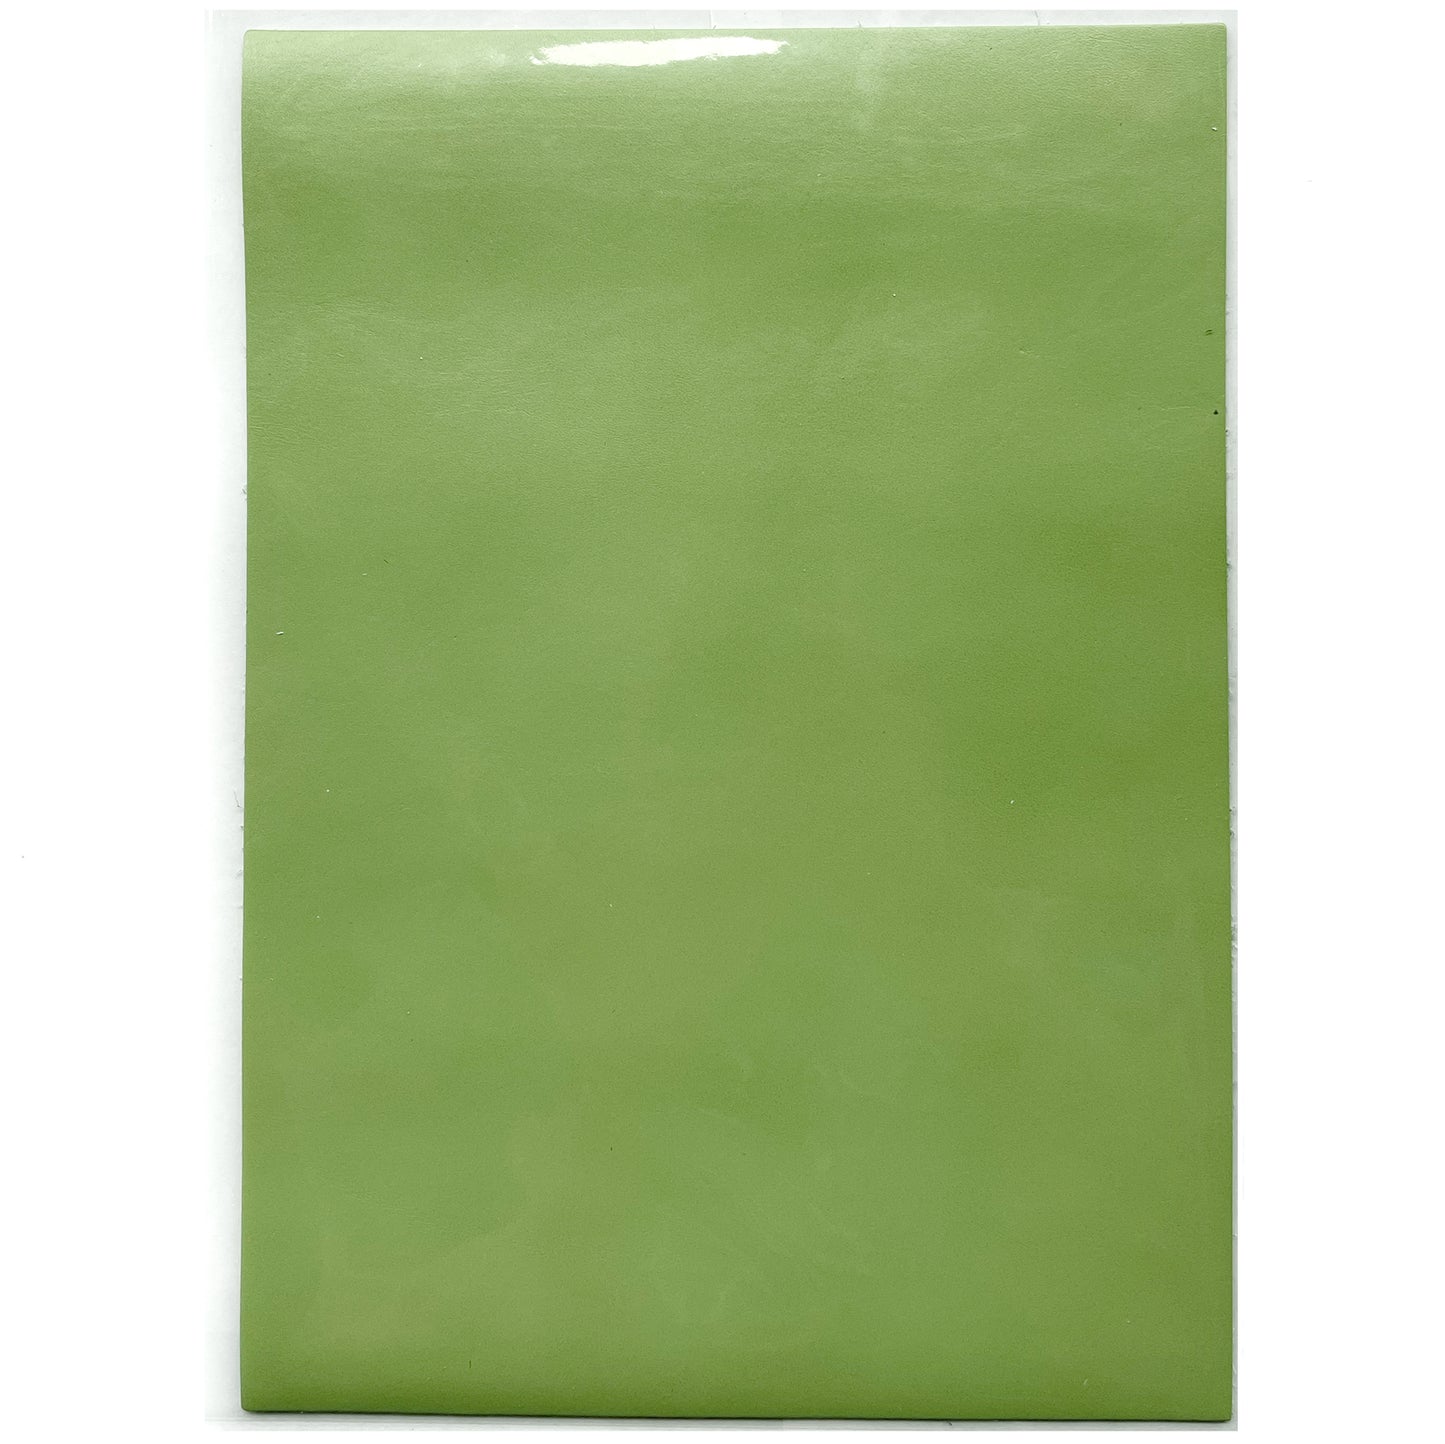 Super leather A4 #23 Light Green